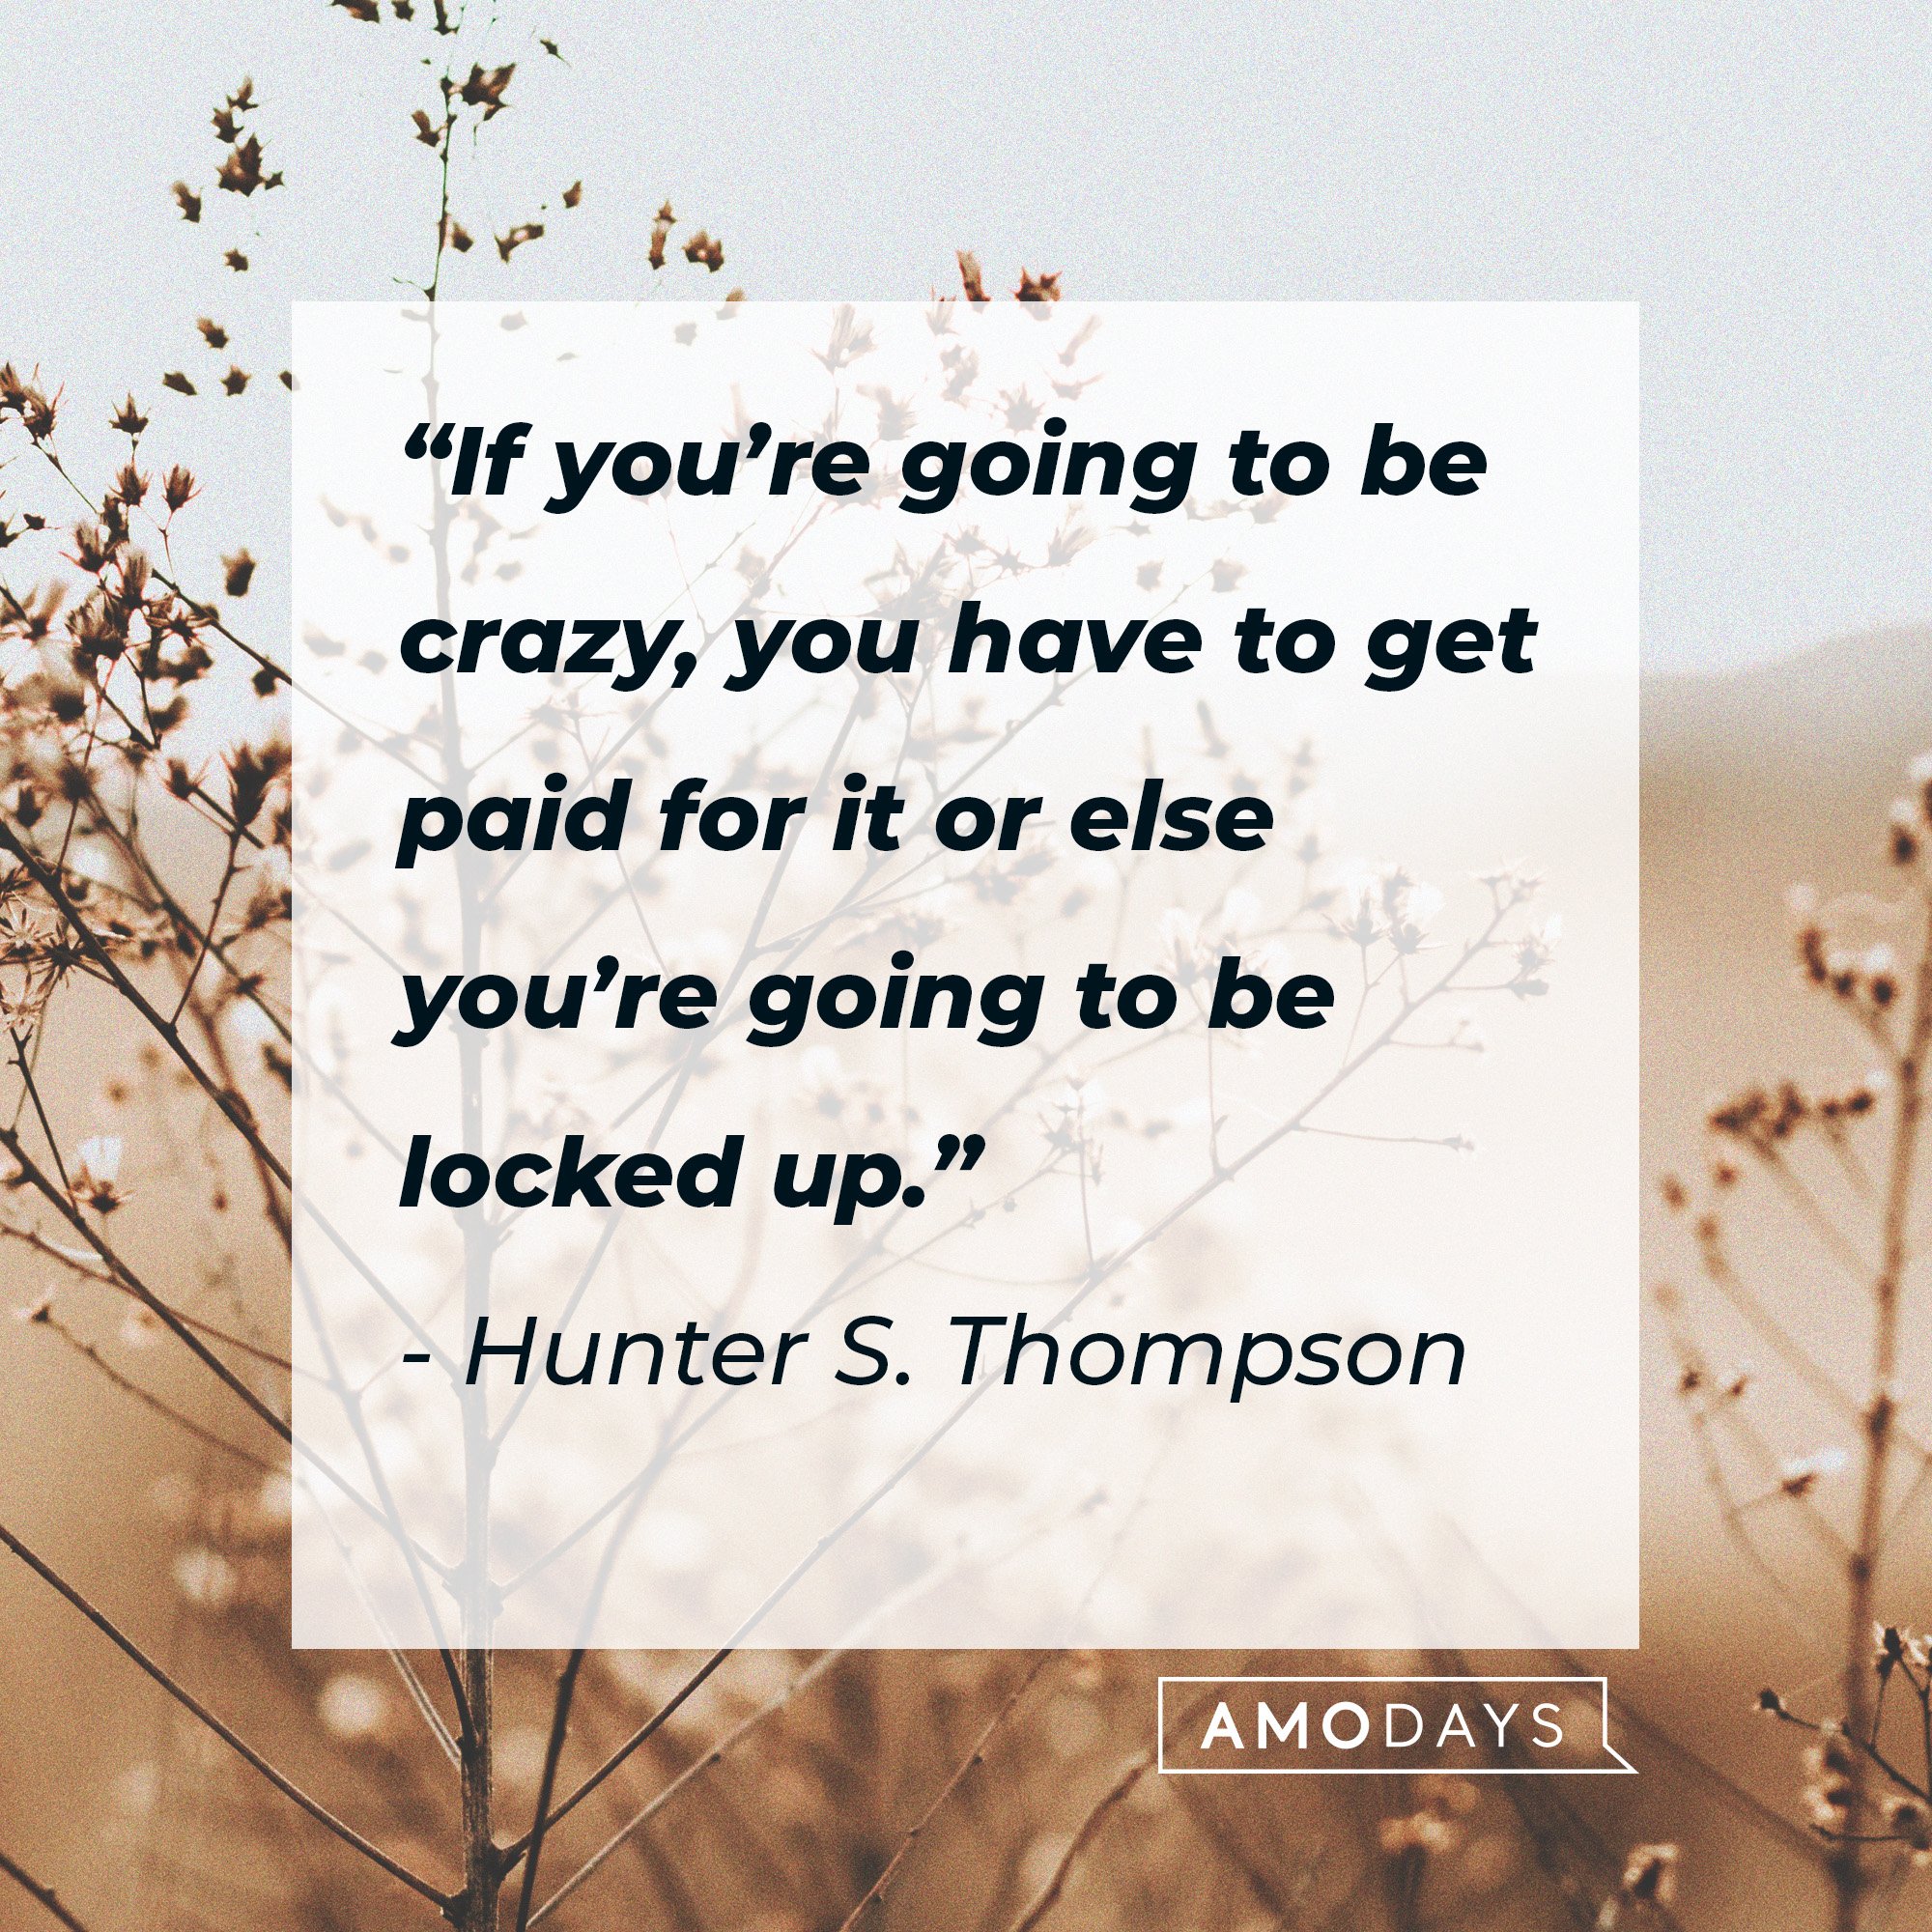 Hunter S. Thompson’s quote: “If you’re going to be crazy, you have to get paid for it, or else you’re going to be locked up.”  | Image: AmoDays